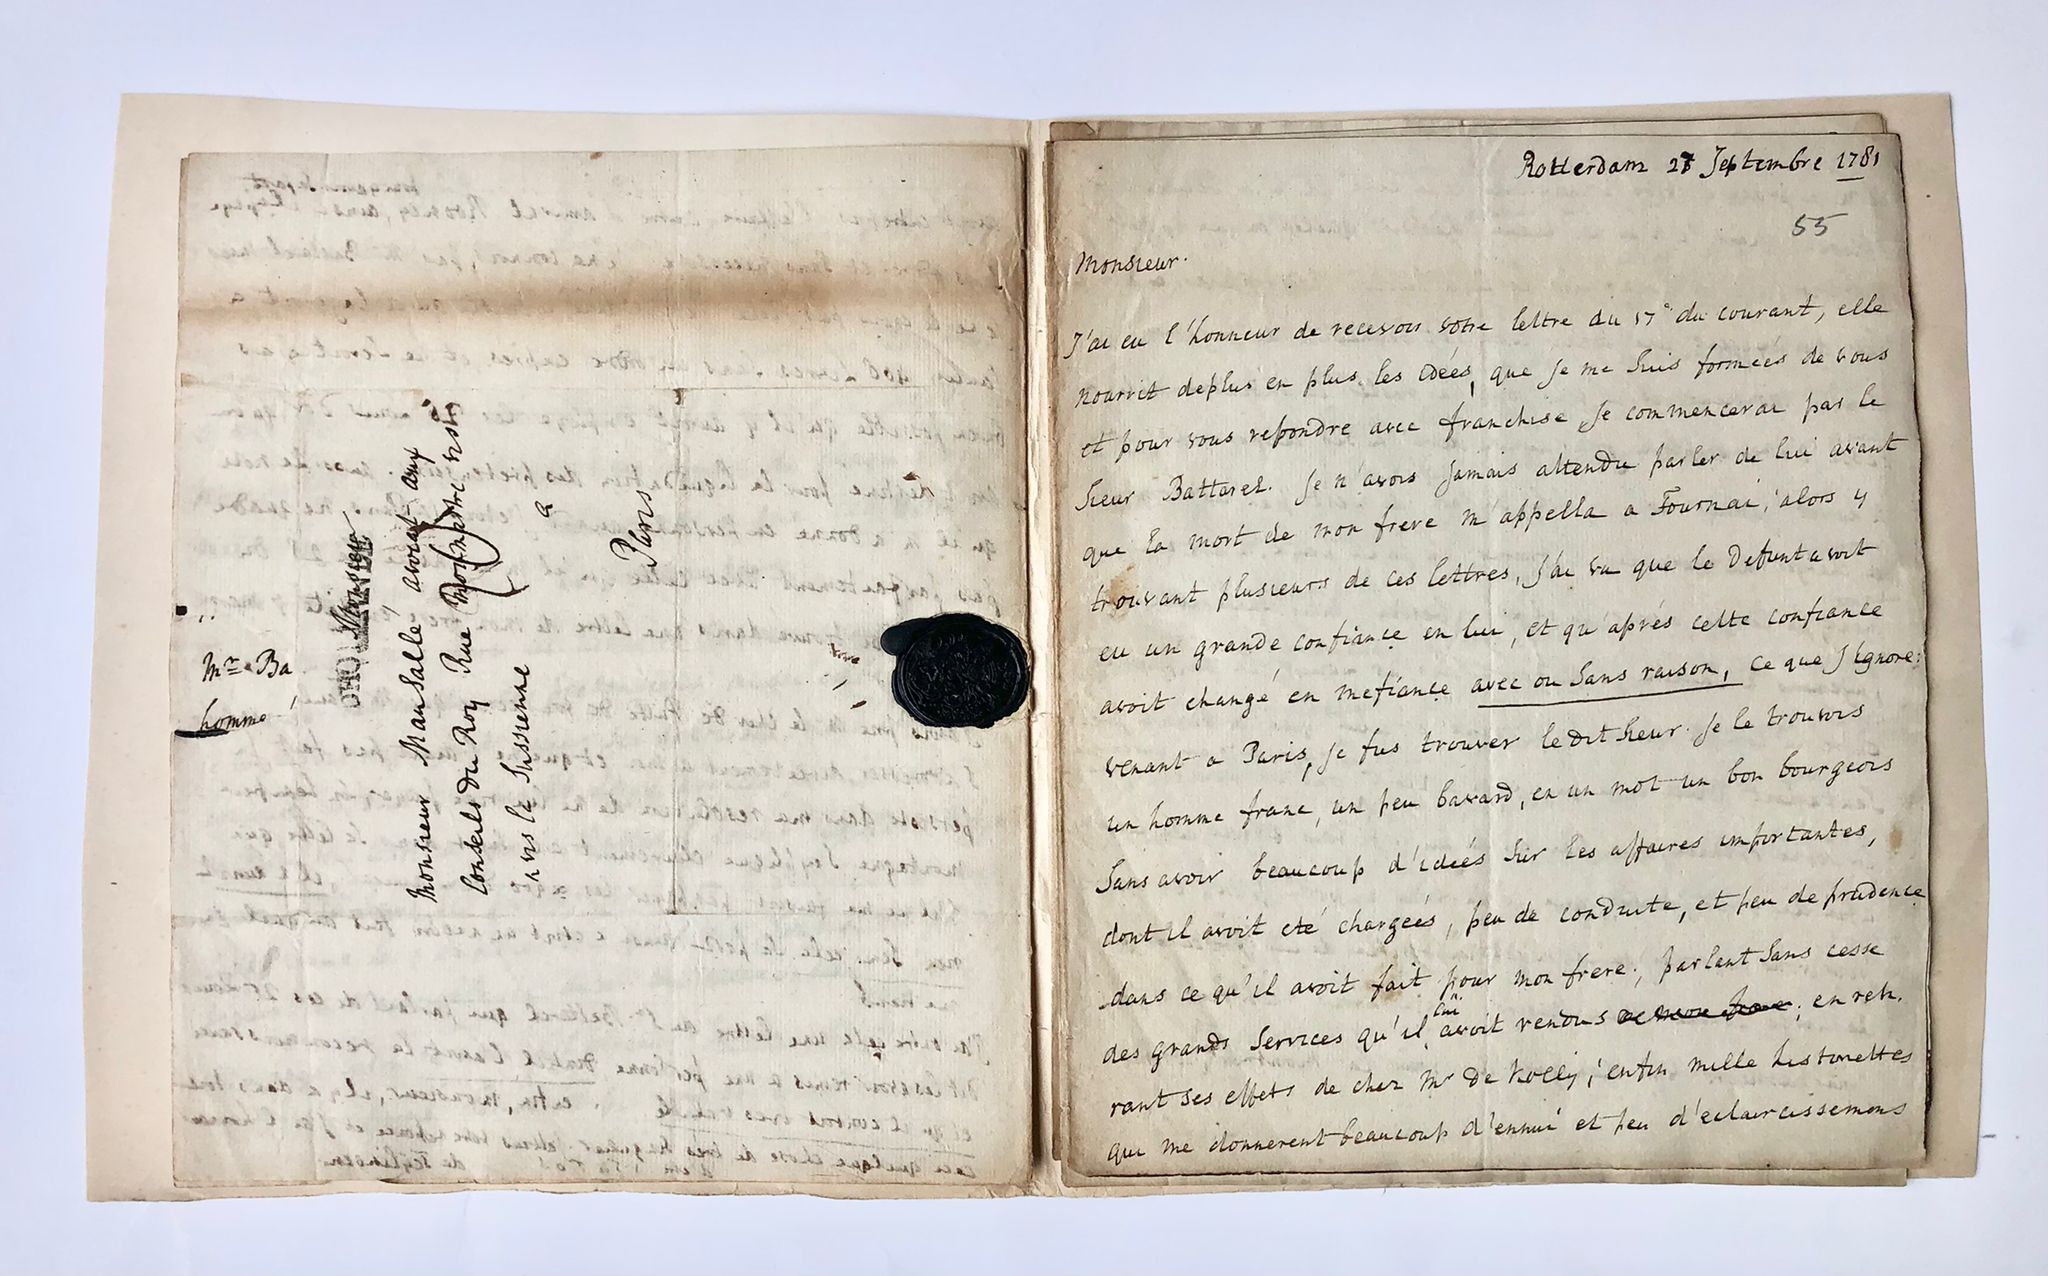  - [Manuscripts, letter, French language] 5 letters by heer Van Teylingen in Rotterdam, to lawyer Mansalle in Paris, d.d. 1781-1784, manuscript, 17 pp. French language.